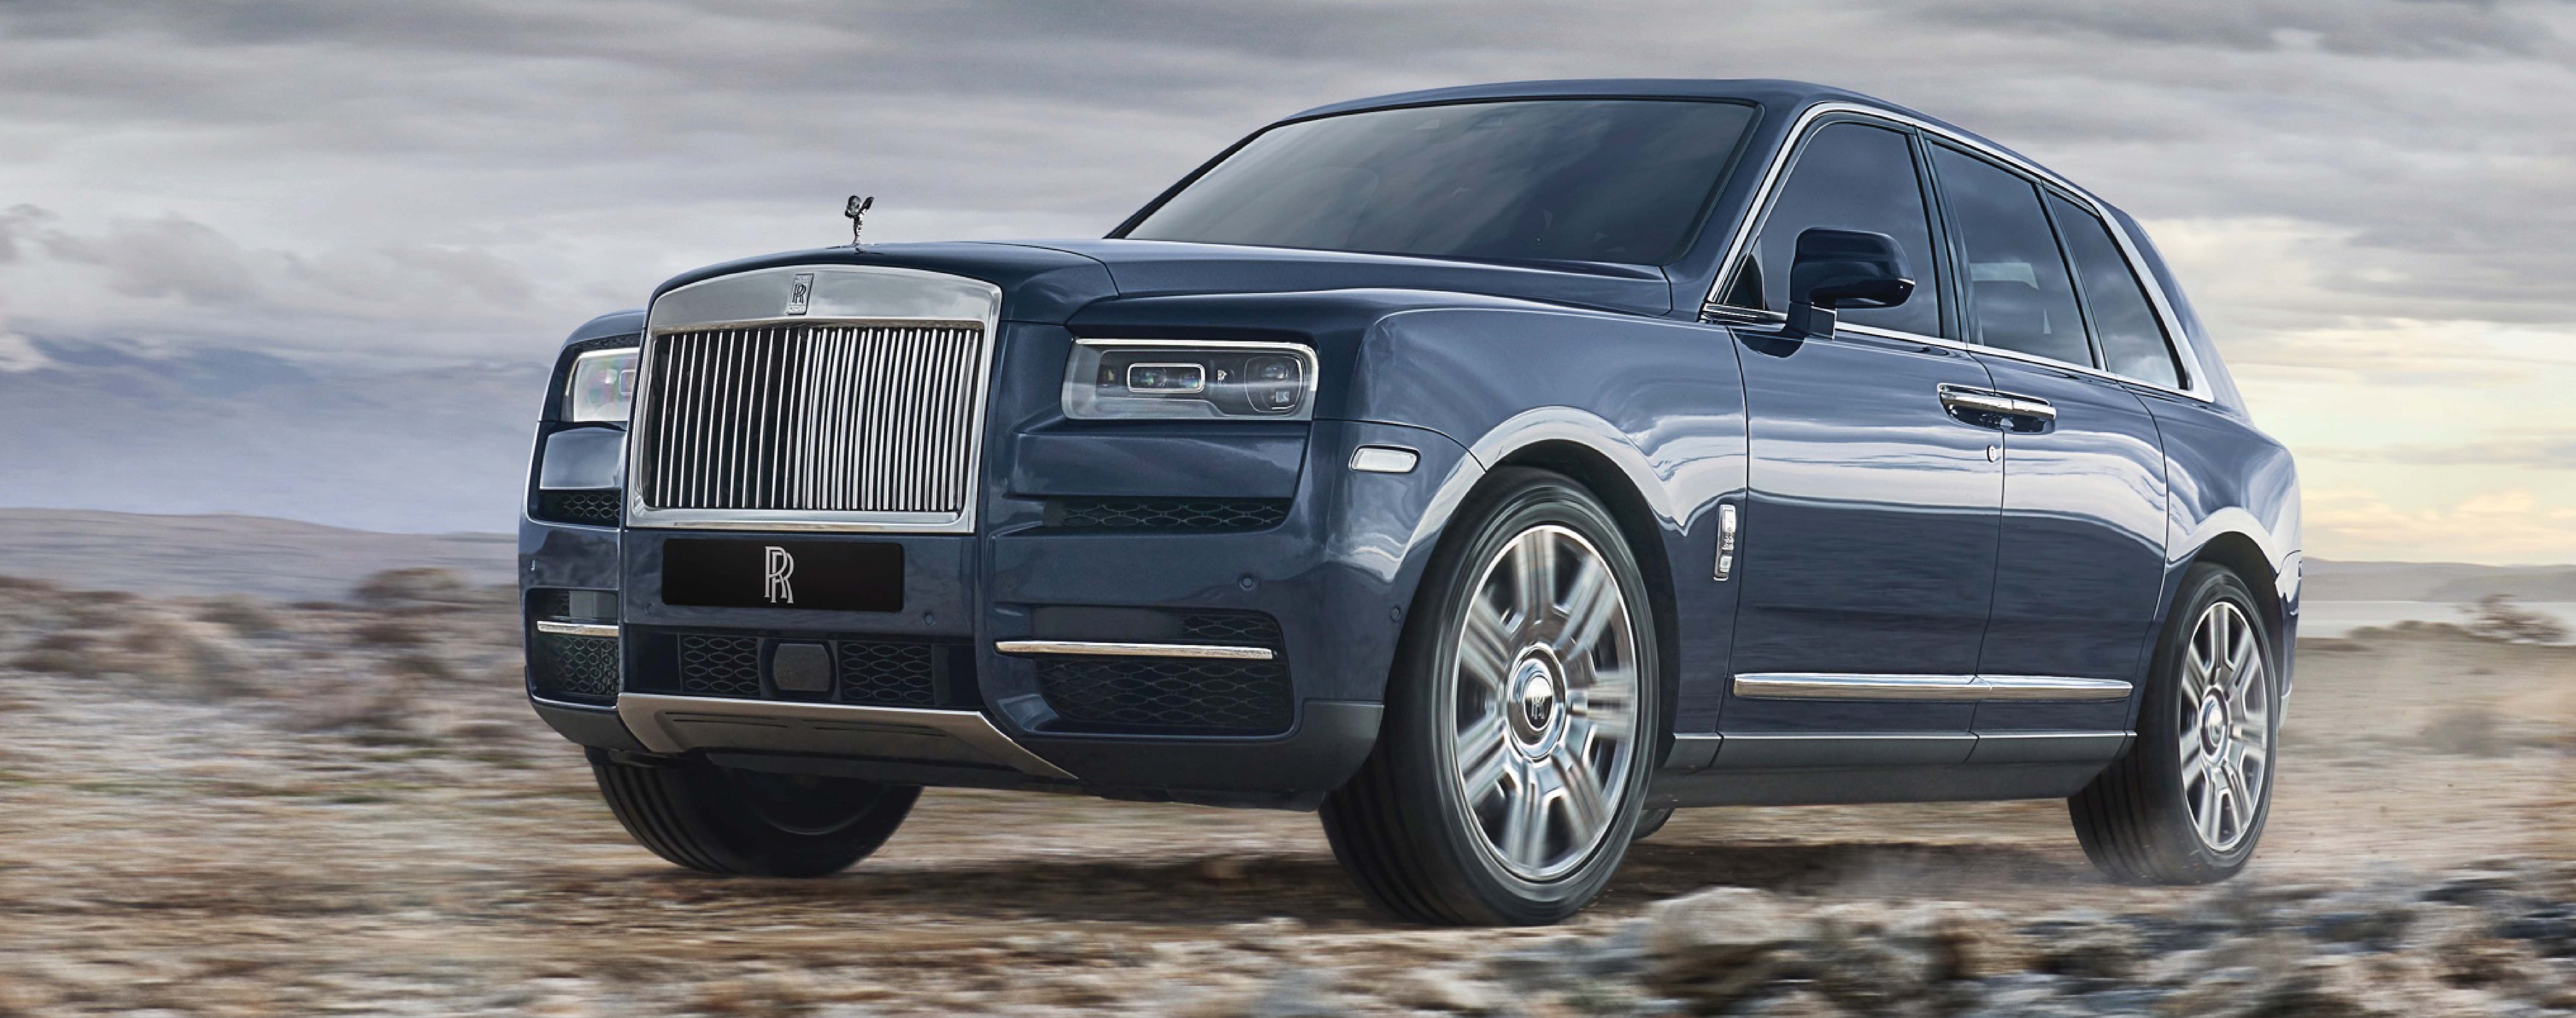 The RollsRoyce Cullinan SUV Is Massiveand Will Not Be Ignored  WSJ